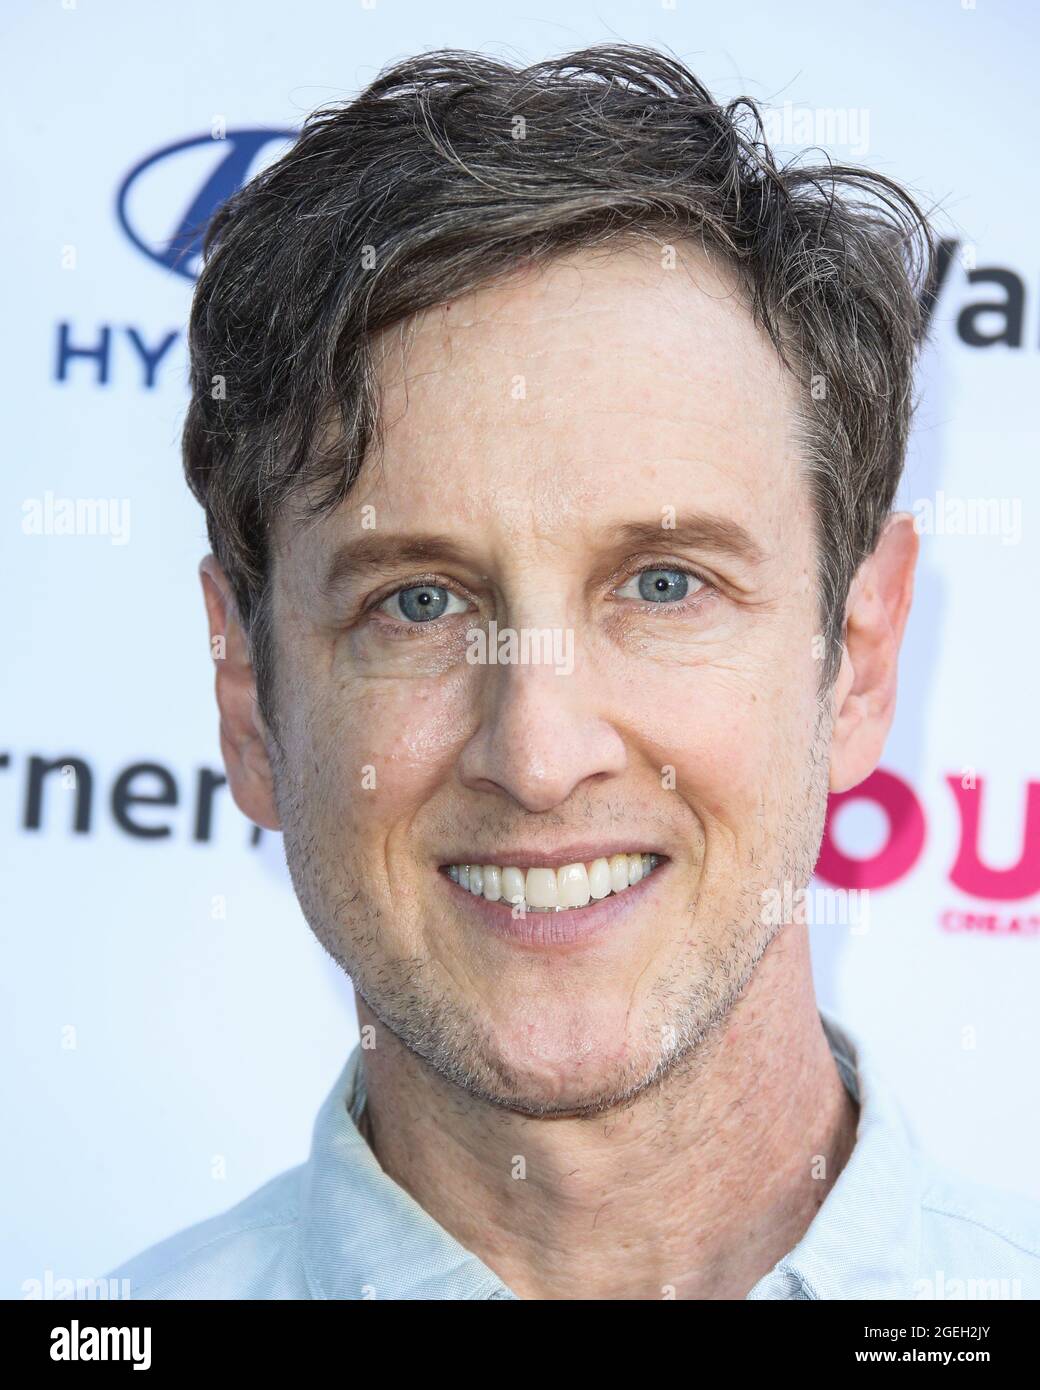 Los Angeles, United States. 19th Aug, 2021. LOS ANGELES, CALIFORNIA, USA - AUGUST 19: Actor Jack Plotnick arrives at the 2021 Outfest Los Angeles LGBTQ Film Festival Screening Of 'The Sixth Reel' held at the Directors Guild of America on August 19, 2021 in Los Angeles, California, United States. (Photo by Xavier Collin/Image Press Agency) Credit: Image Press Agency/Alamy Live News Stock Photo